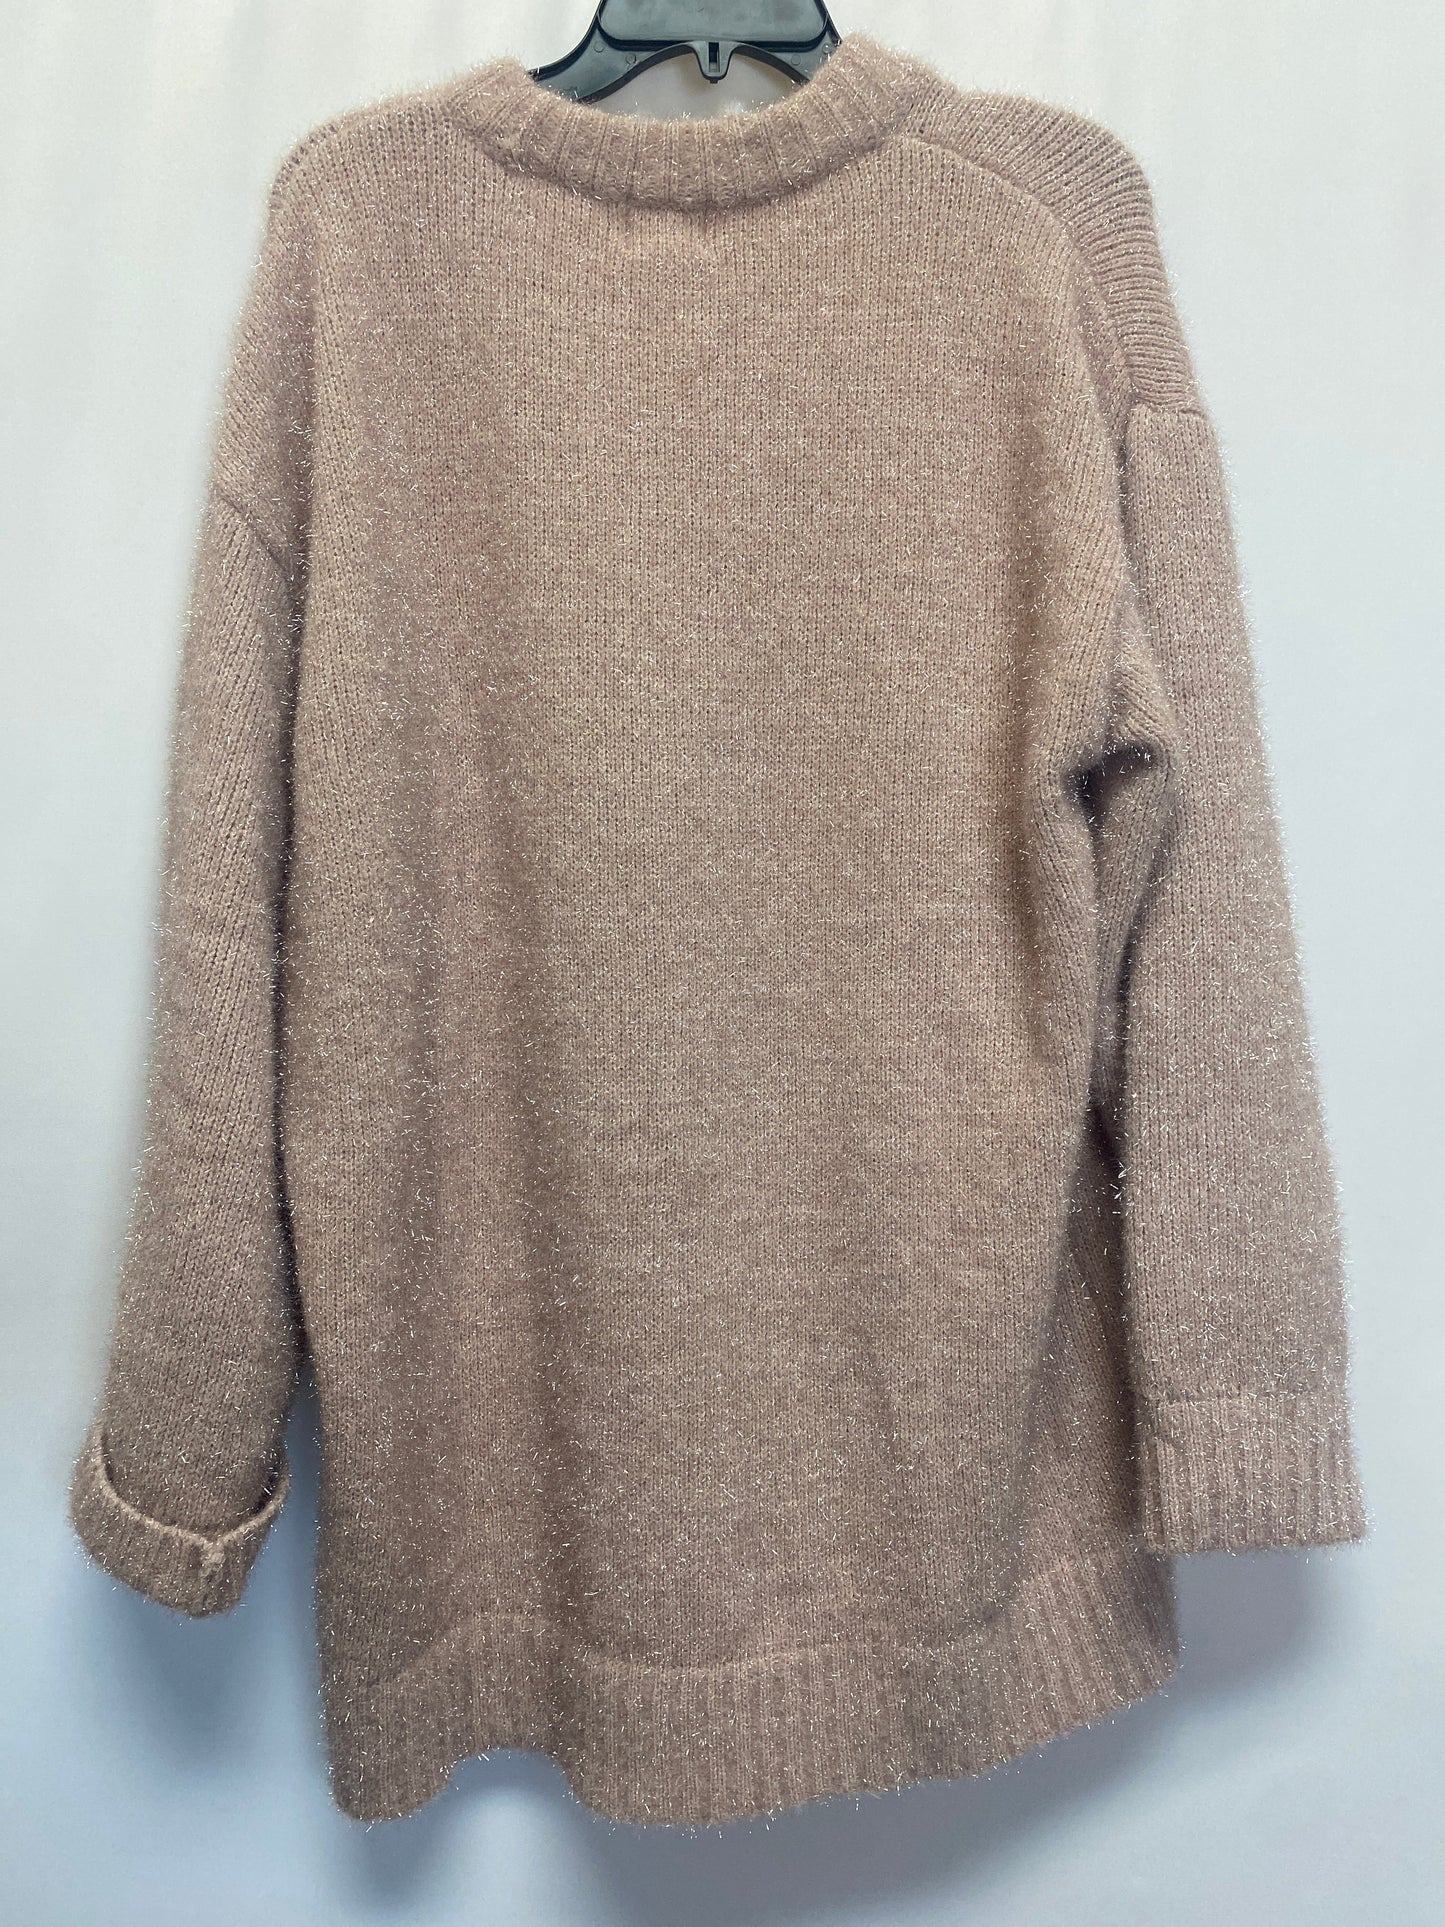 Sweater By H&m  Size: Xxl